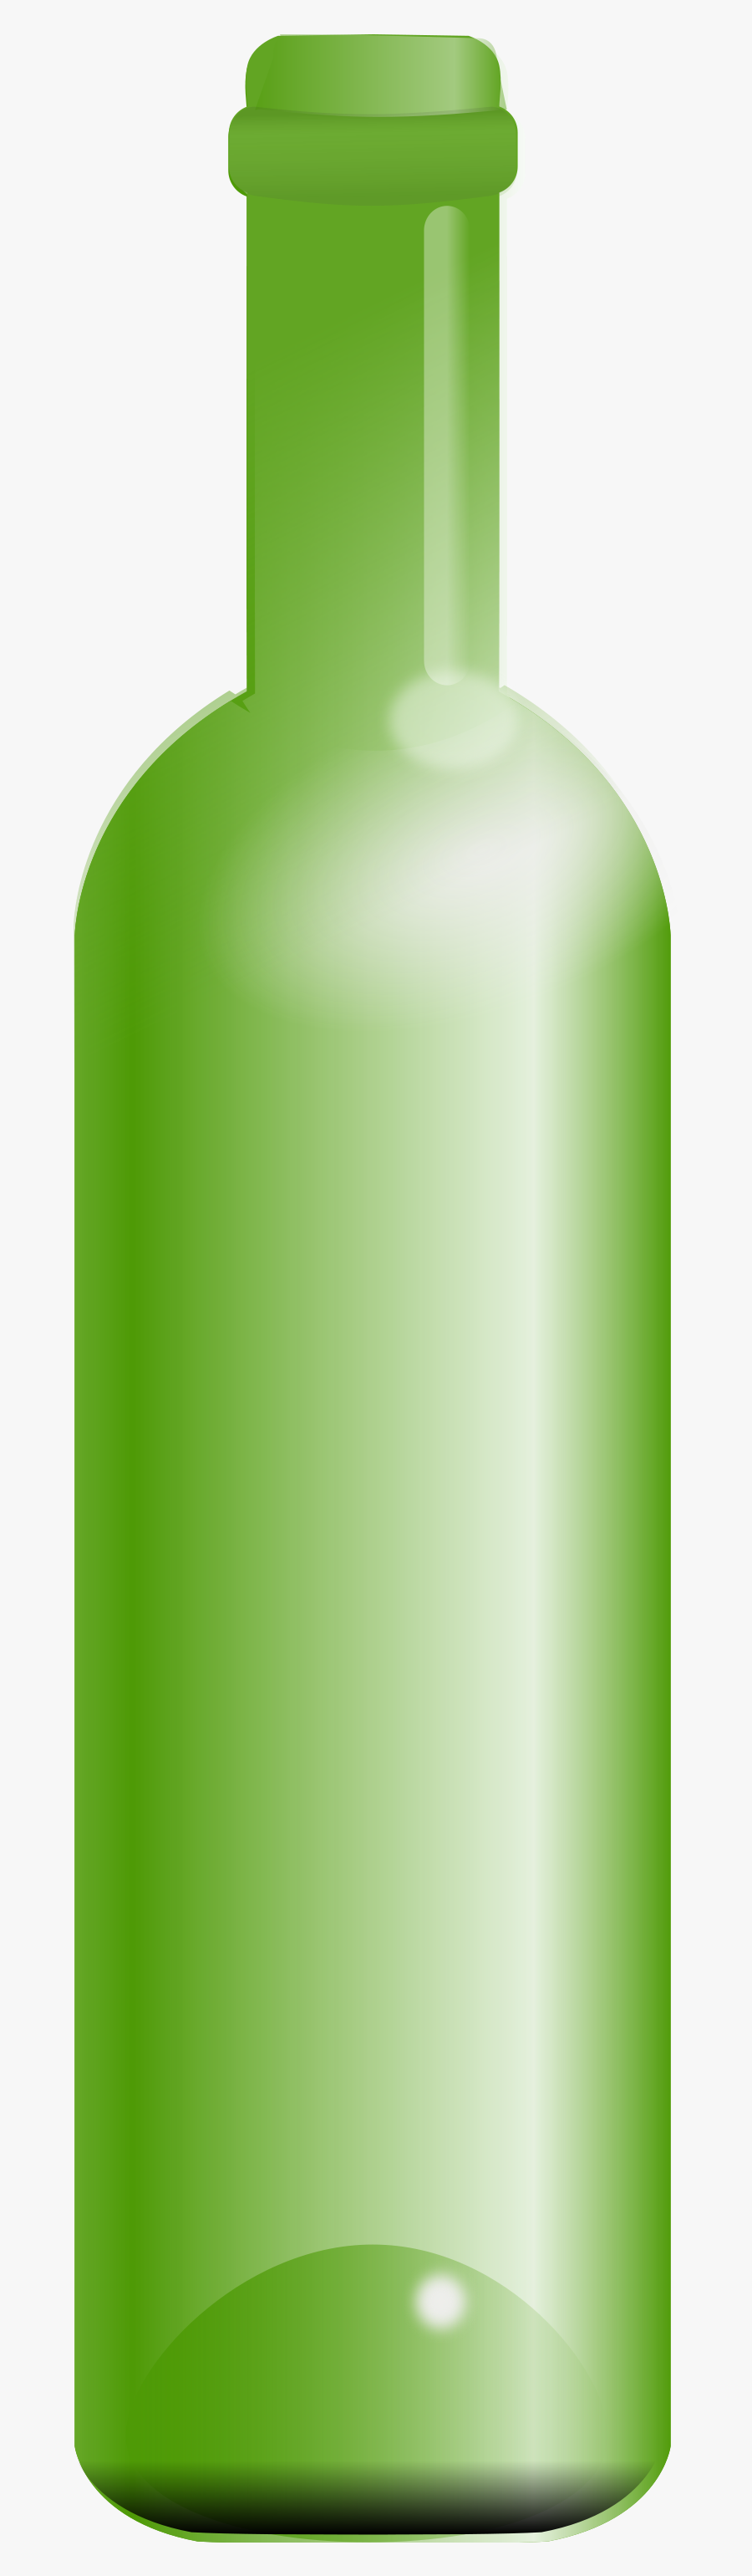 Bottle Free Stock Photo Illustration Of A Green Wine - Green Bottle Clipart, Transparent Clipart